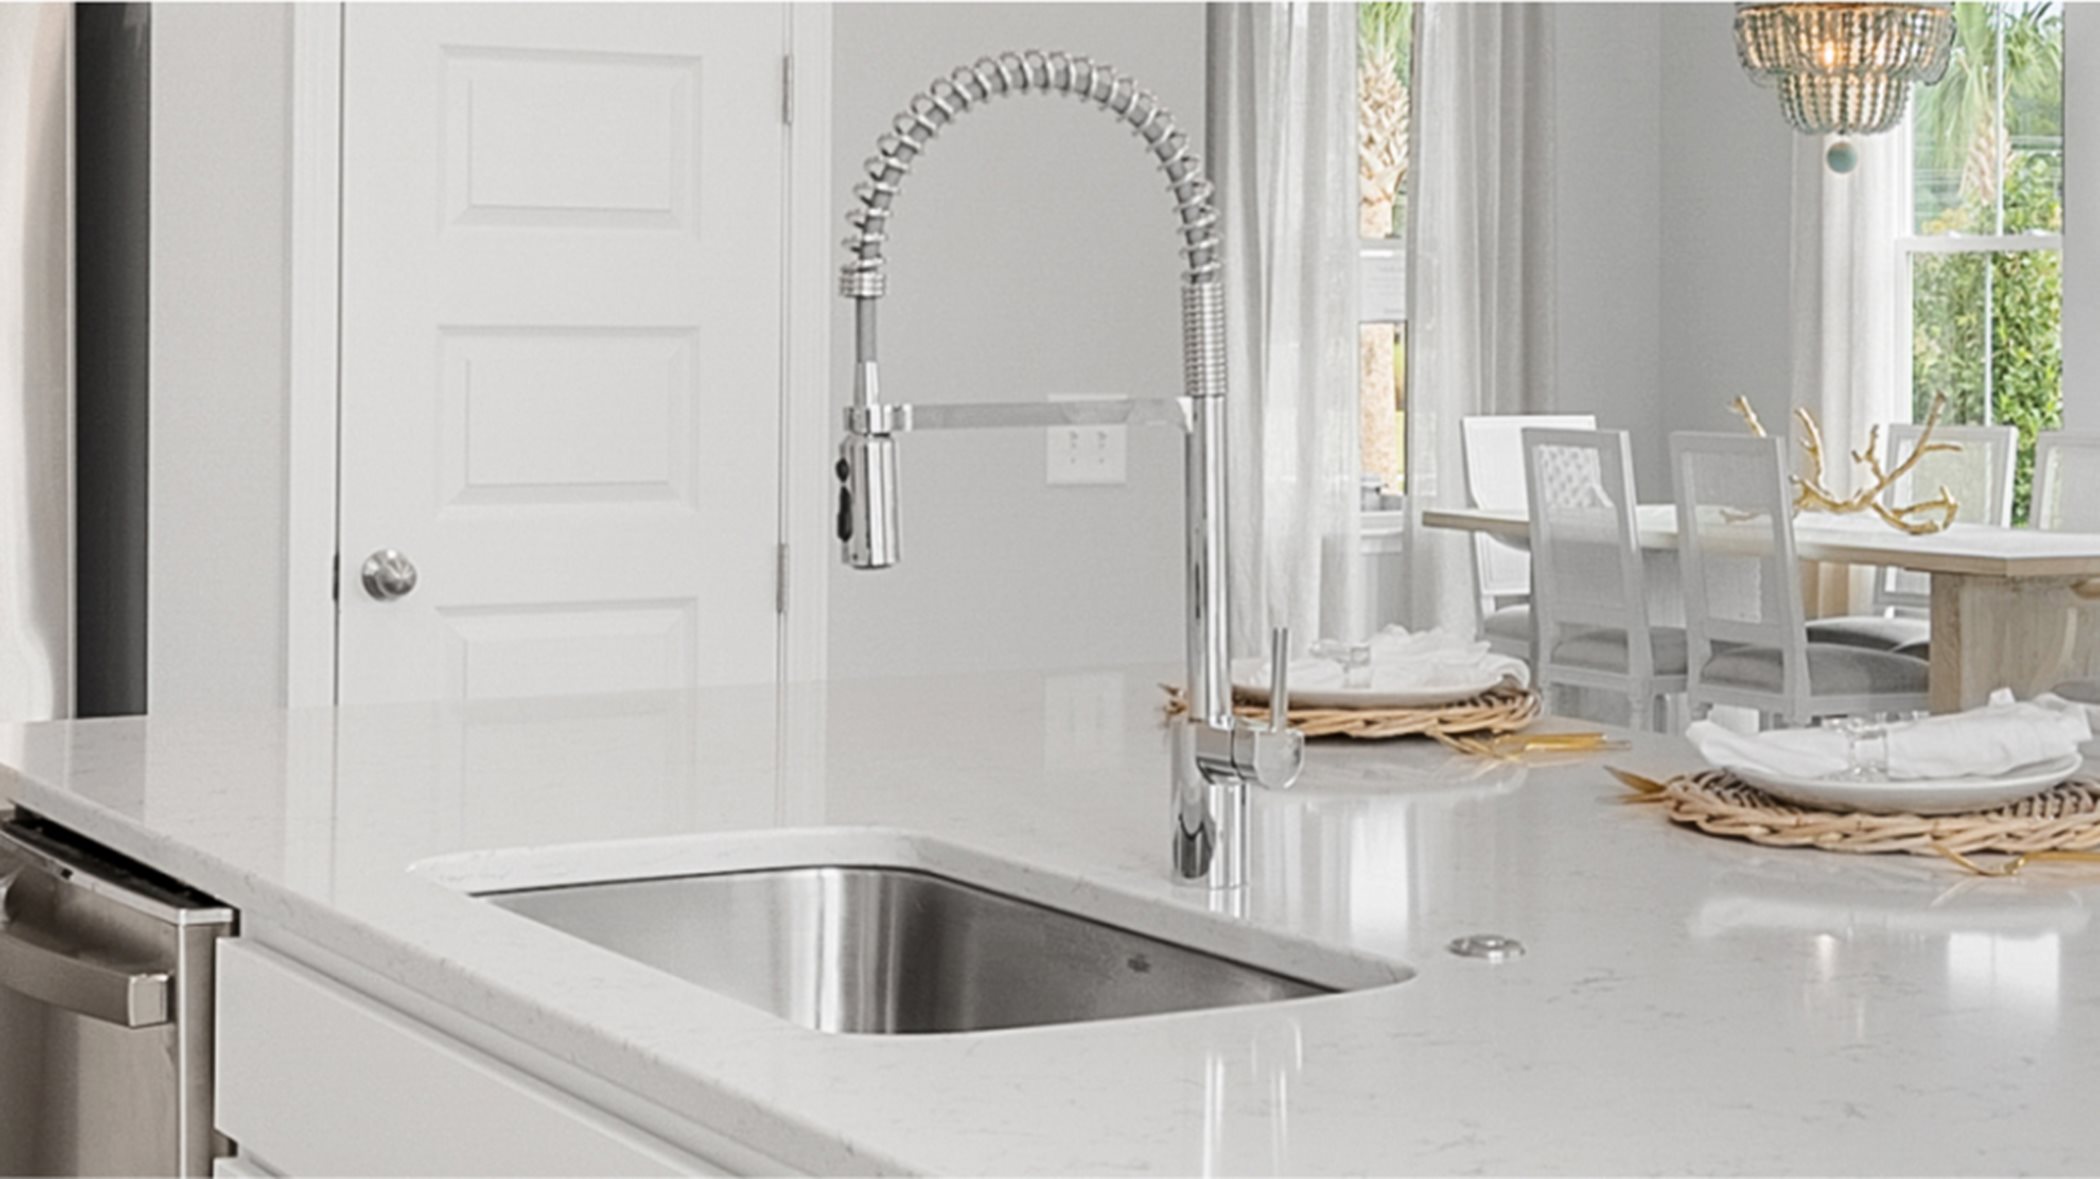 Summers Corner The Village - Row Collection Tradd Kitchen Faucet